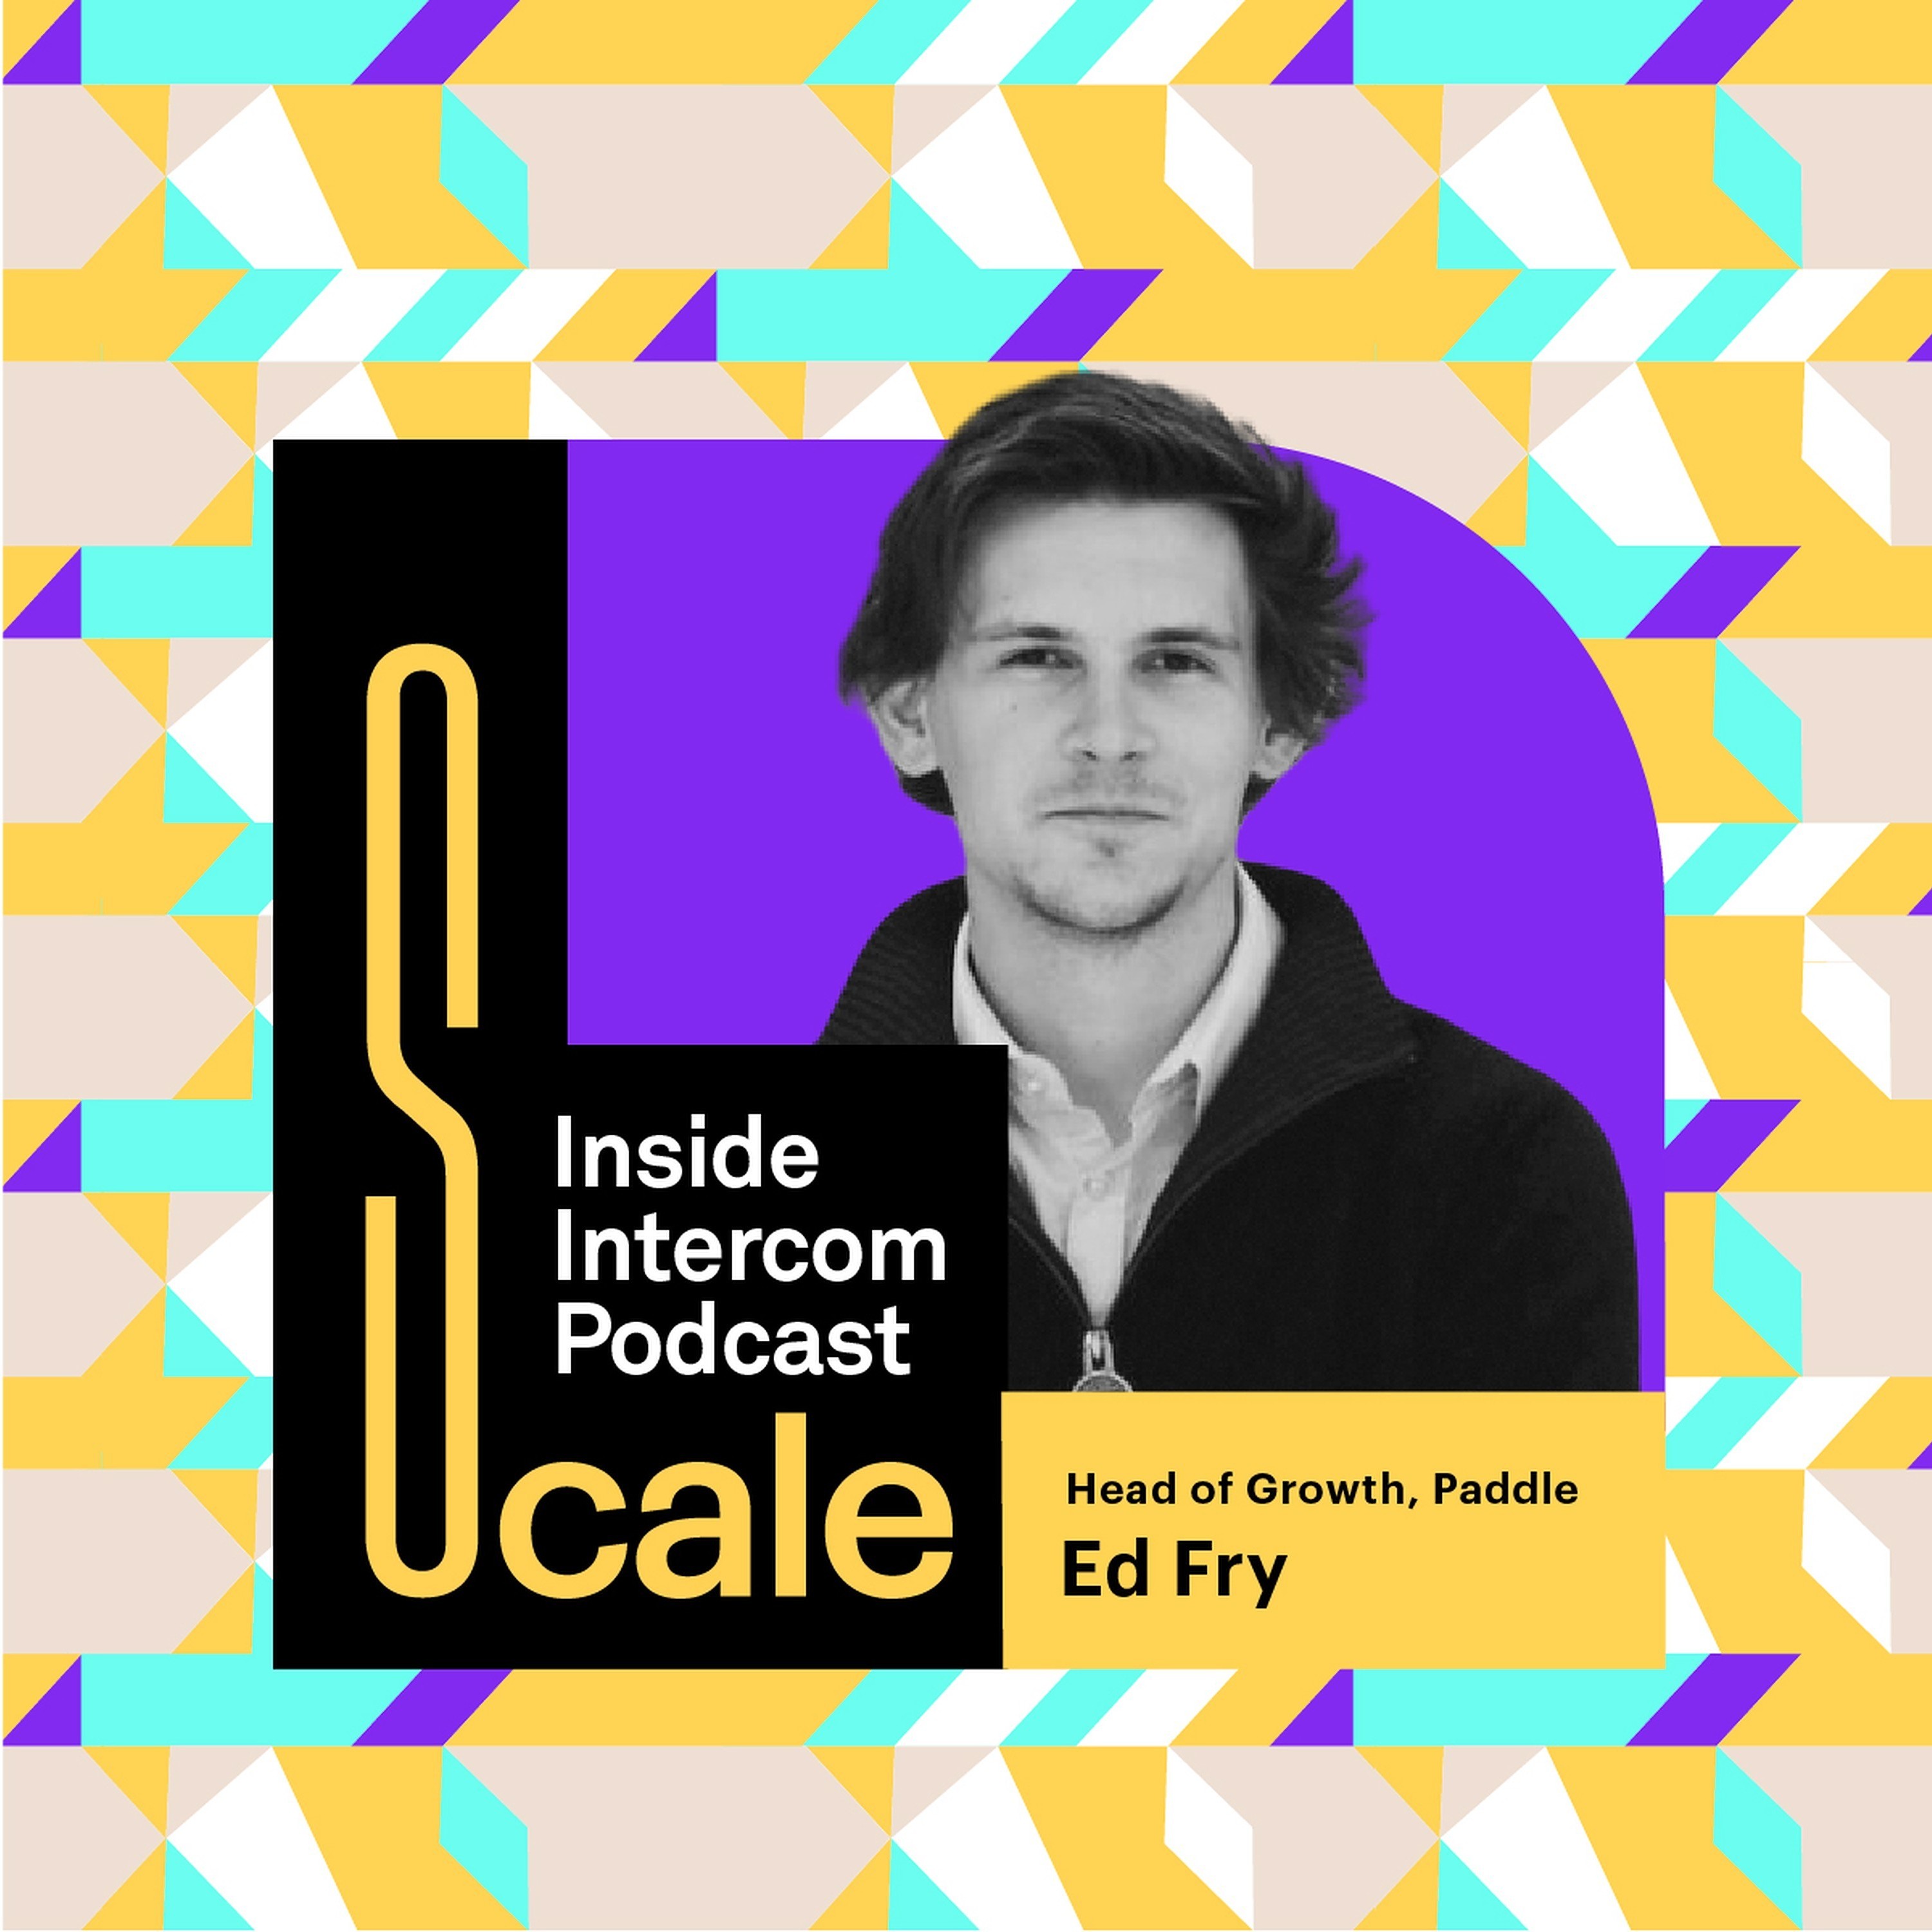 Scale: How to achieve 2,500% revenue growth: 5 lessons from Paddle’s Ed Fry (S02E03)